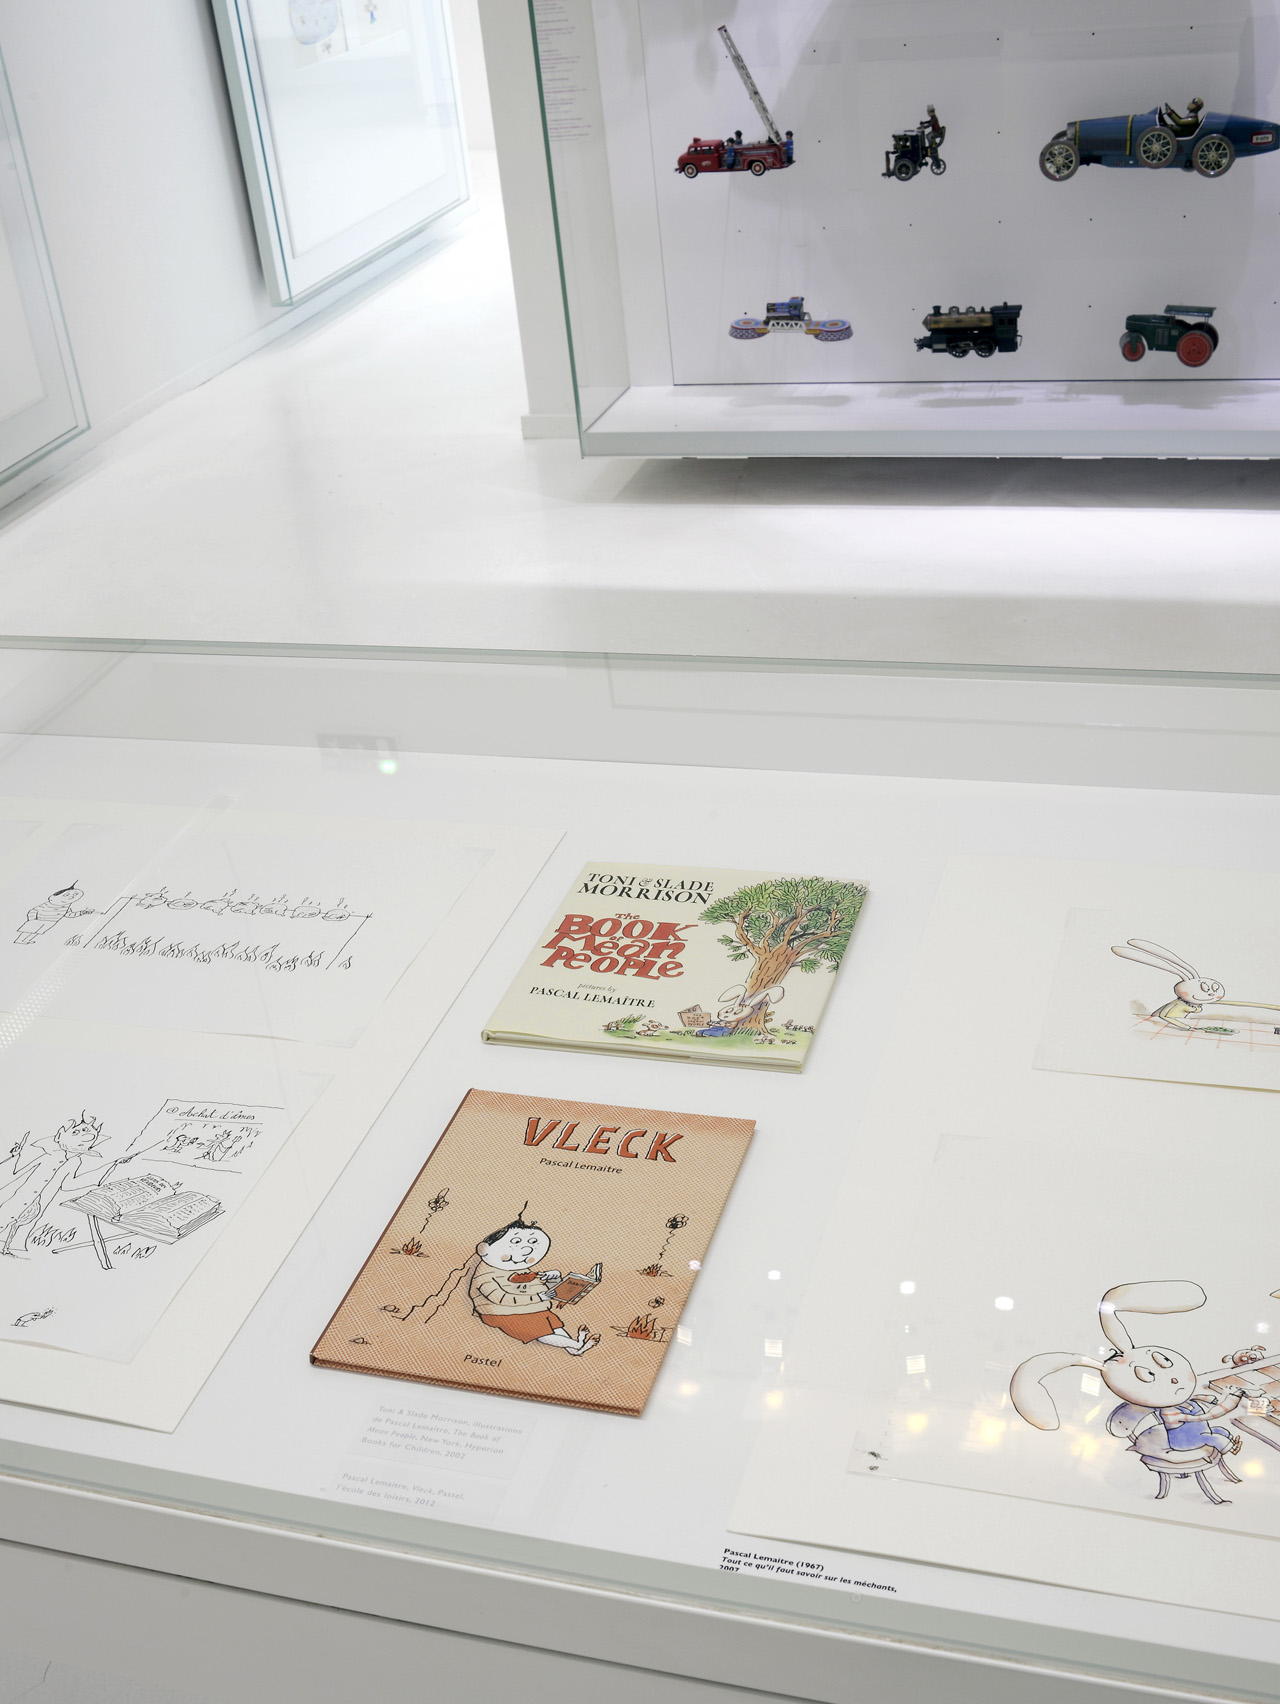 The Book of Mean People, Vleck and Le Petit Cordonnier de Venise exhibited at the Tomi Ungerer Museum/ International Center of Illustration.